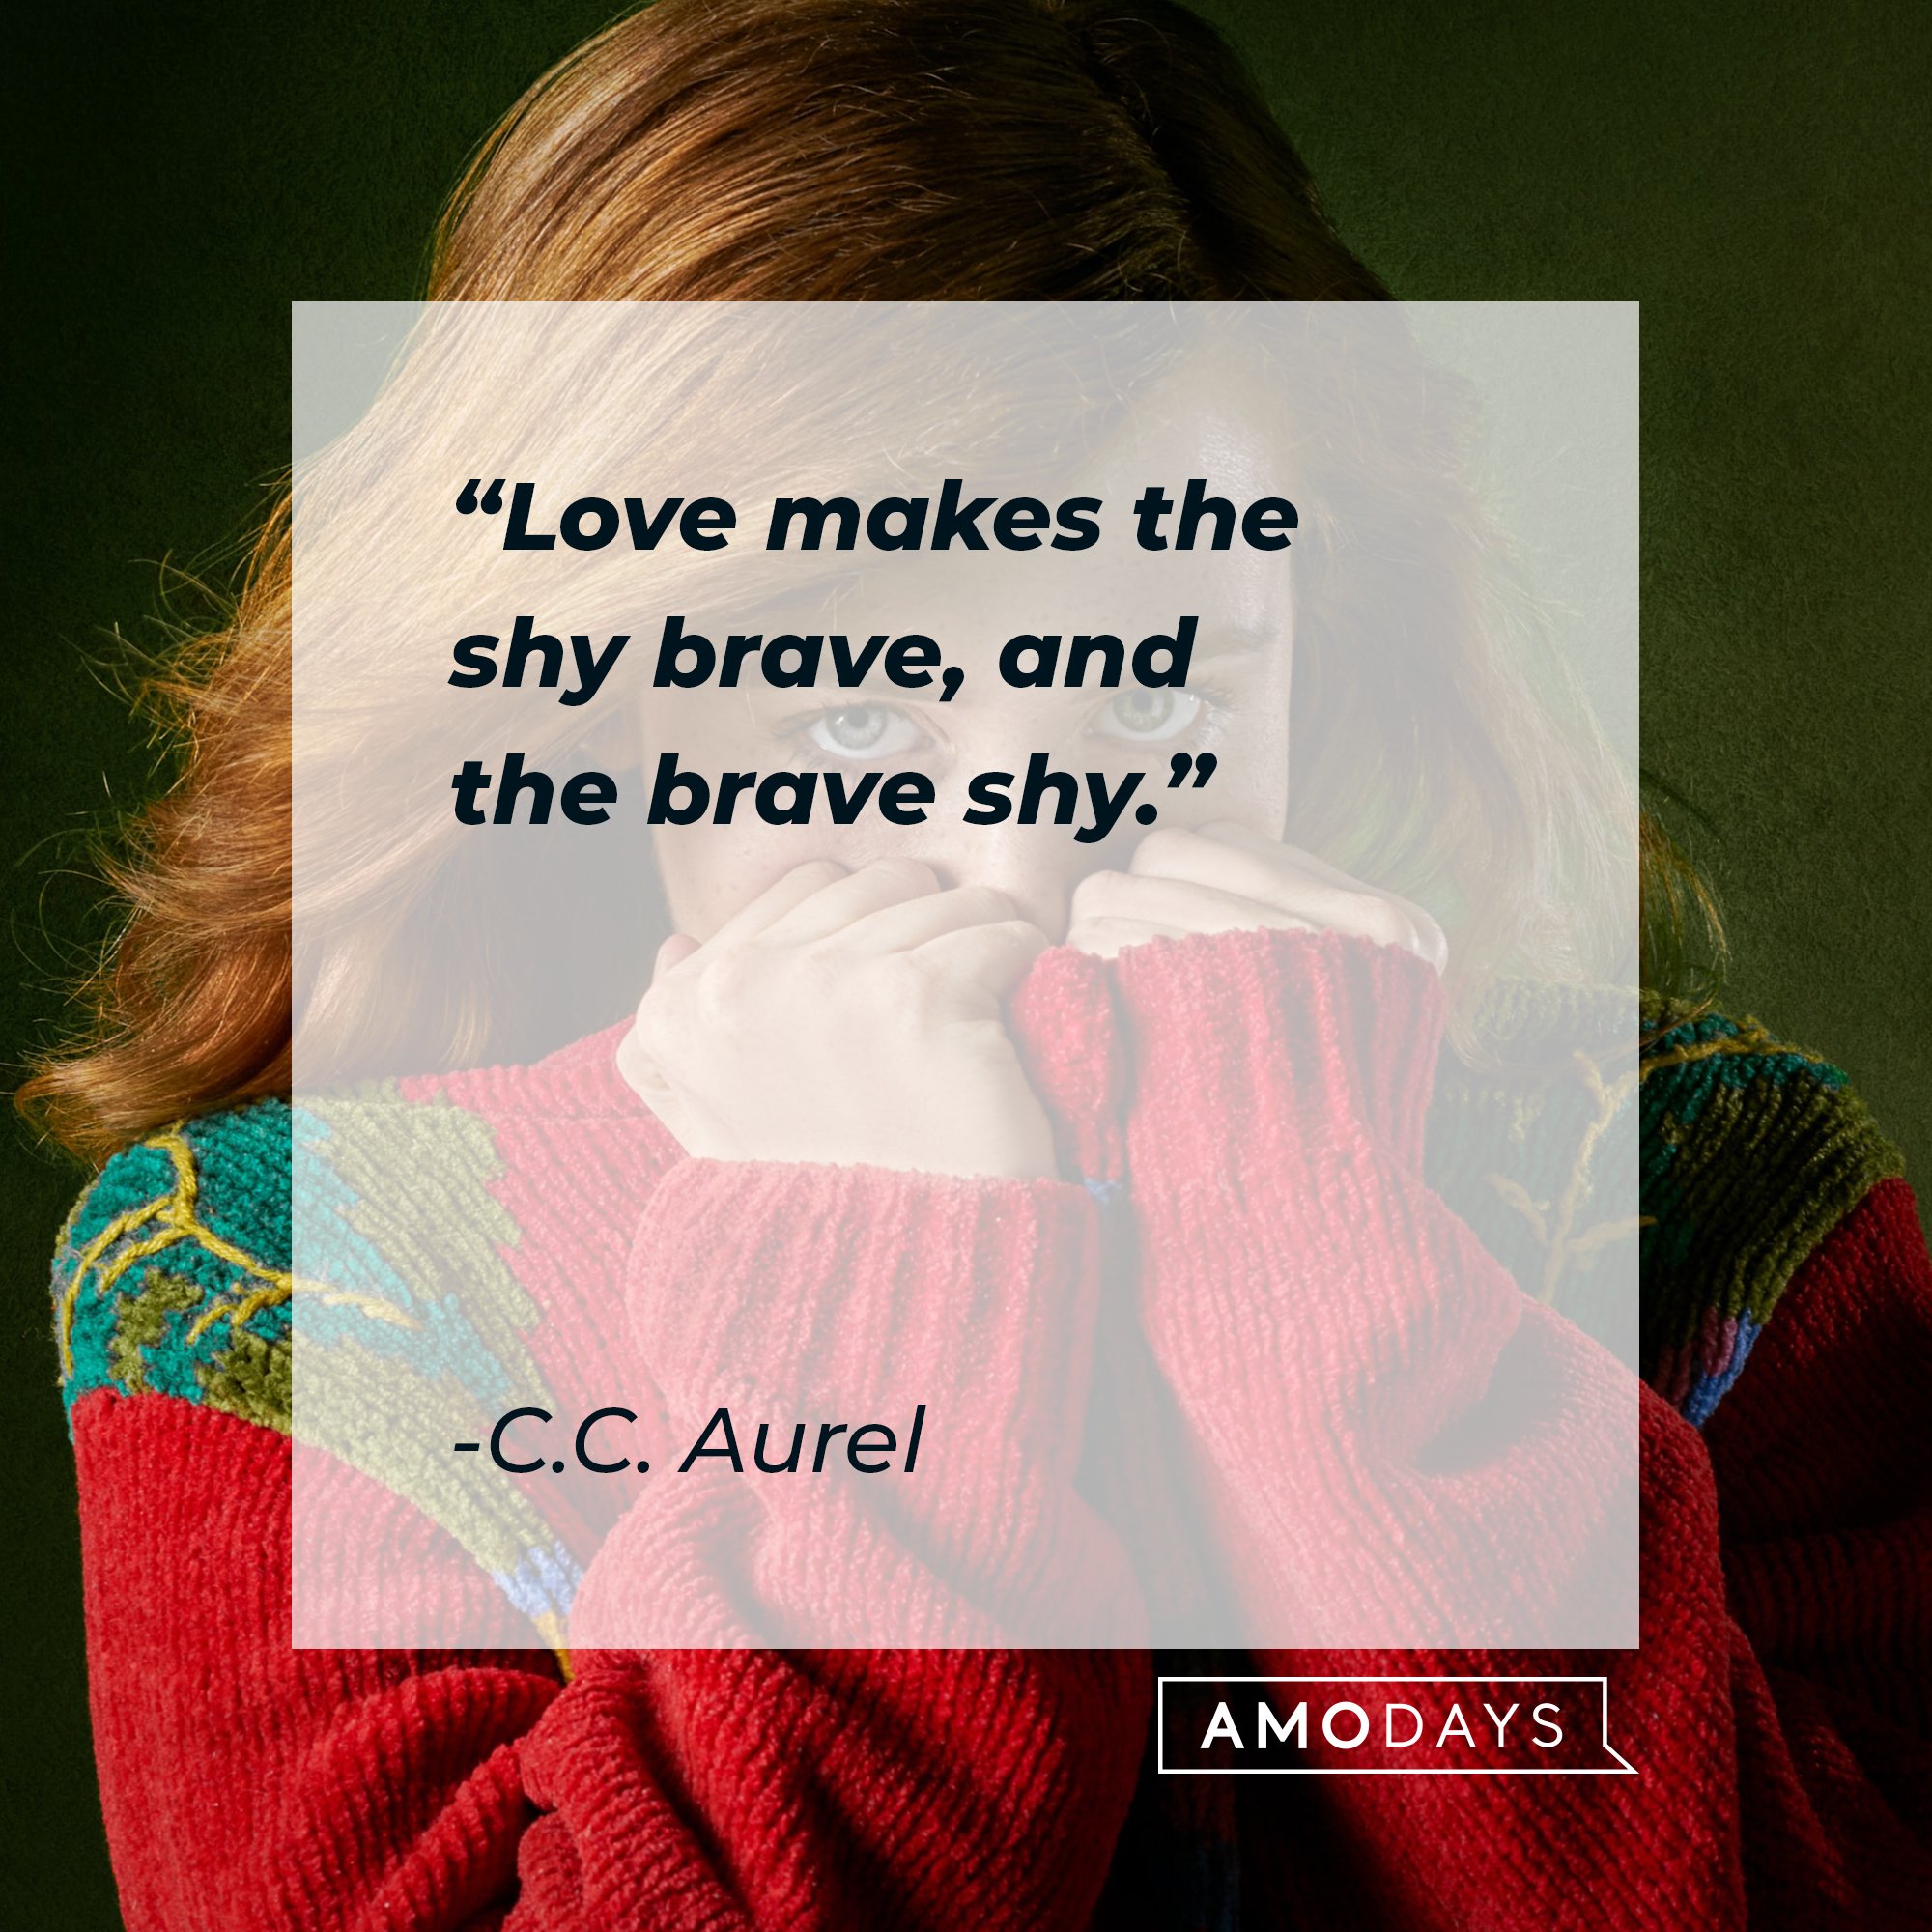 C.C. Aurel's quote: “Love makes the shy brave, and the brave shy.” | Image: AmoDays